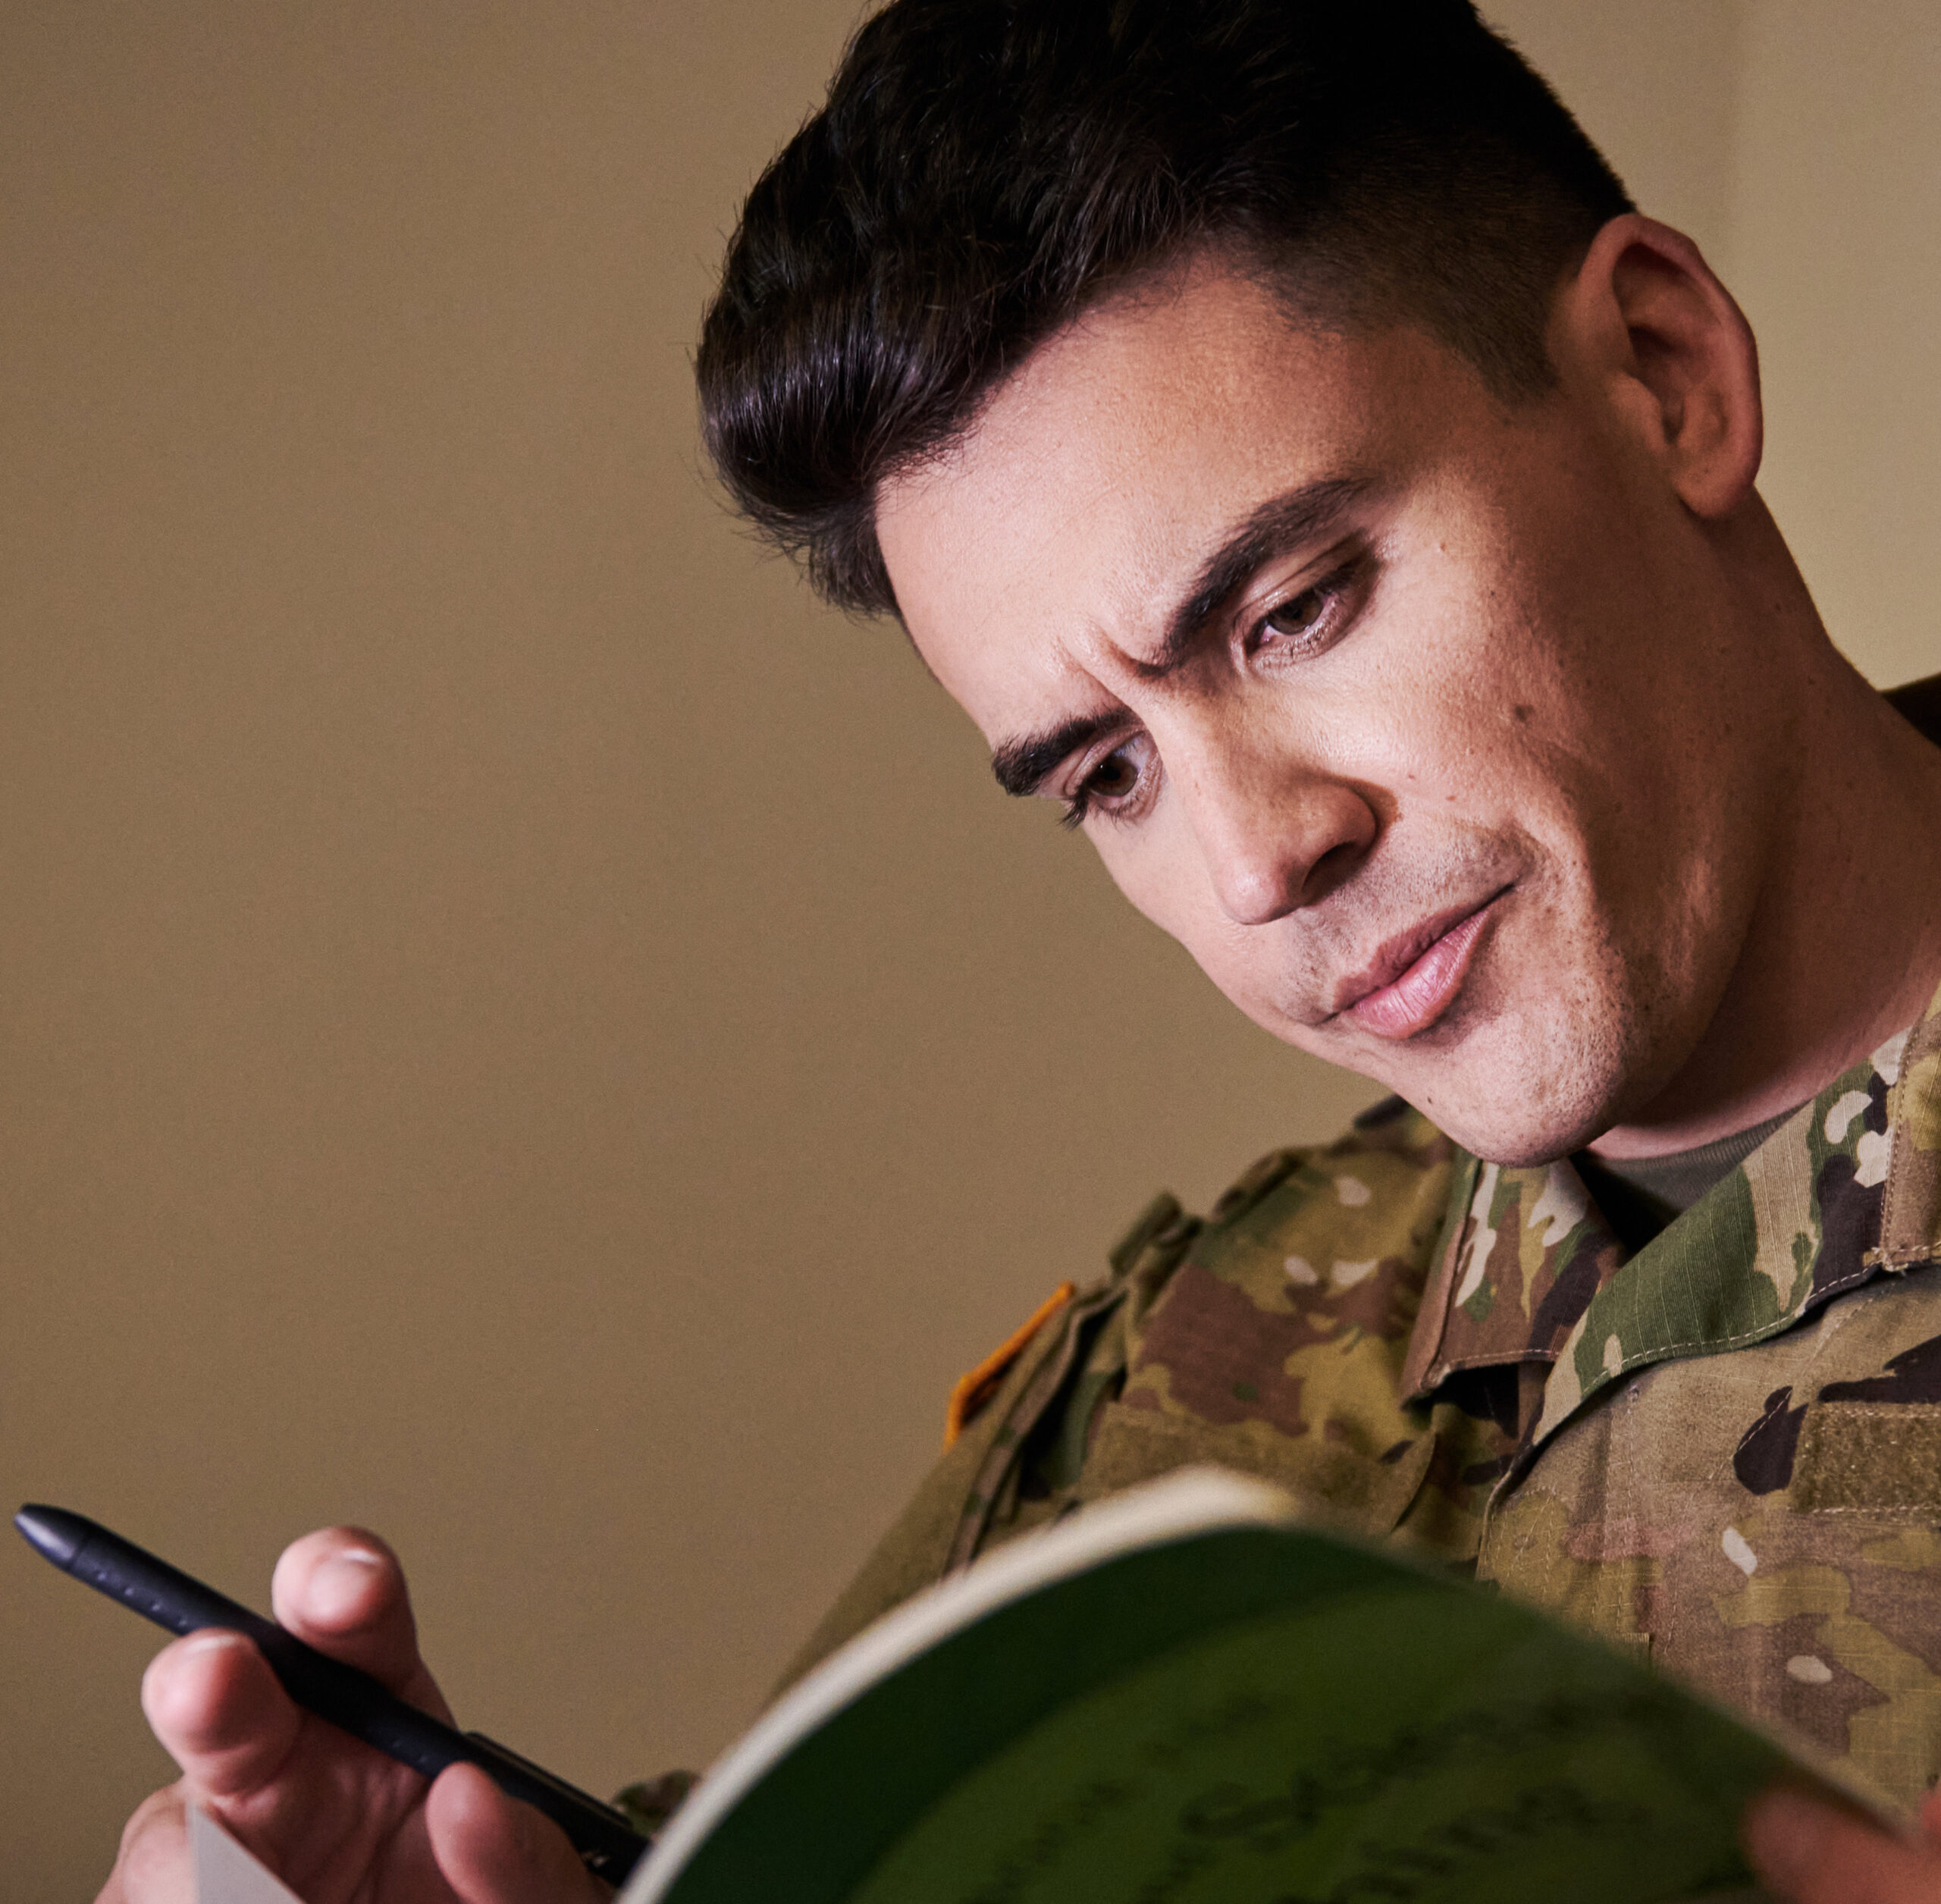 Handsome man in the service reads a book.